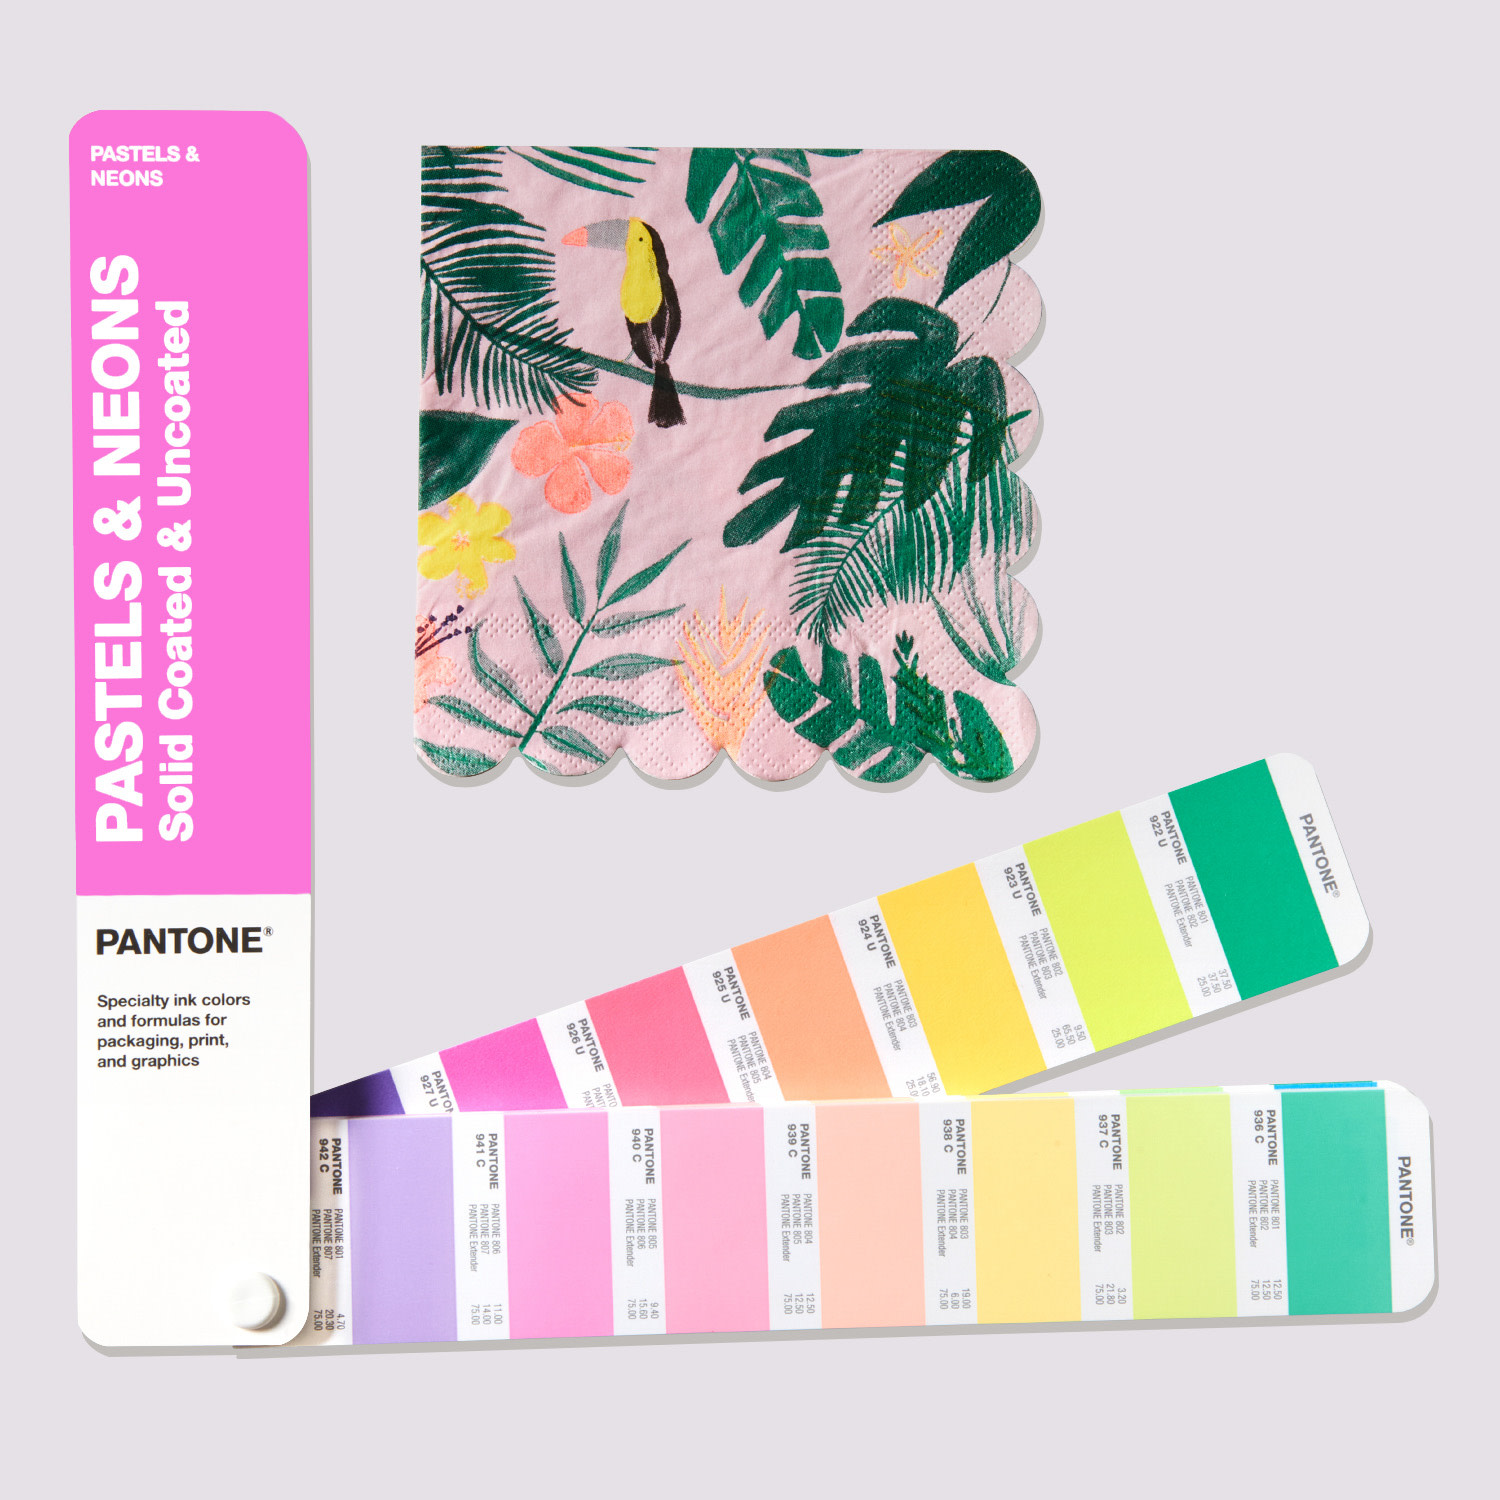 Pastels & Neons Guide gallery 3